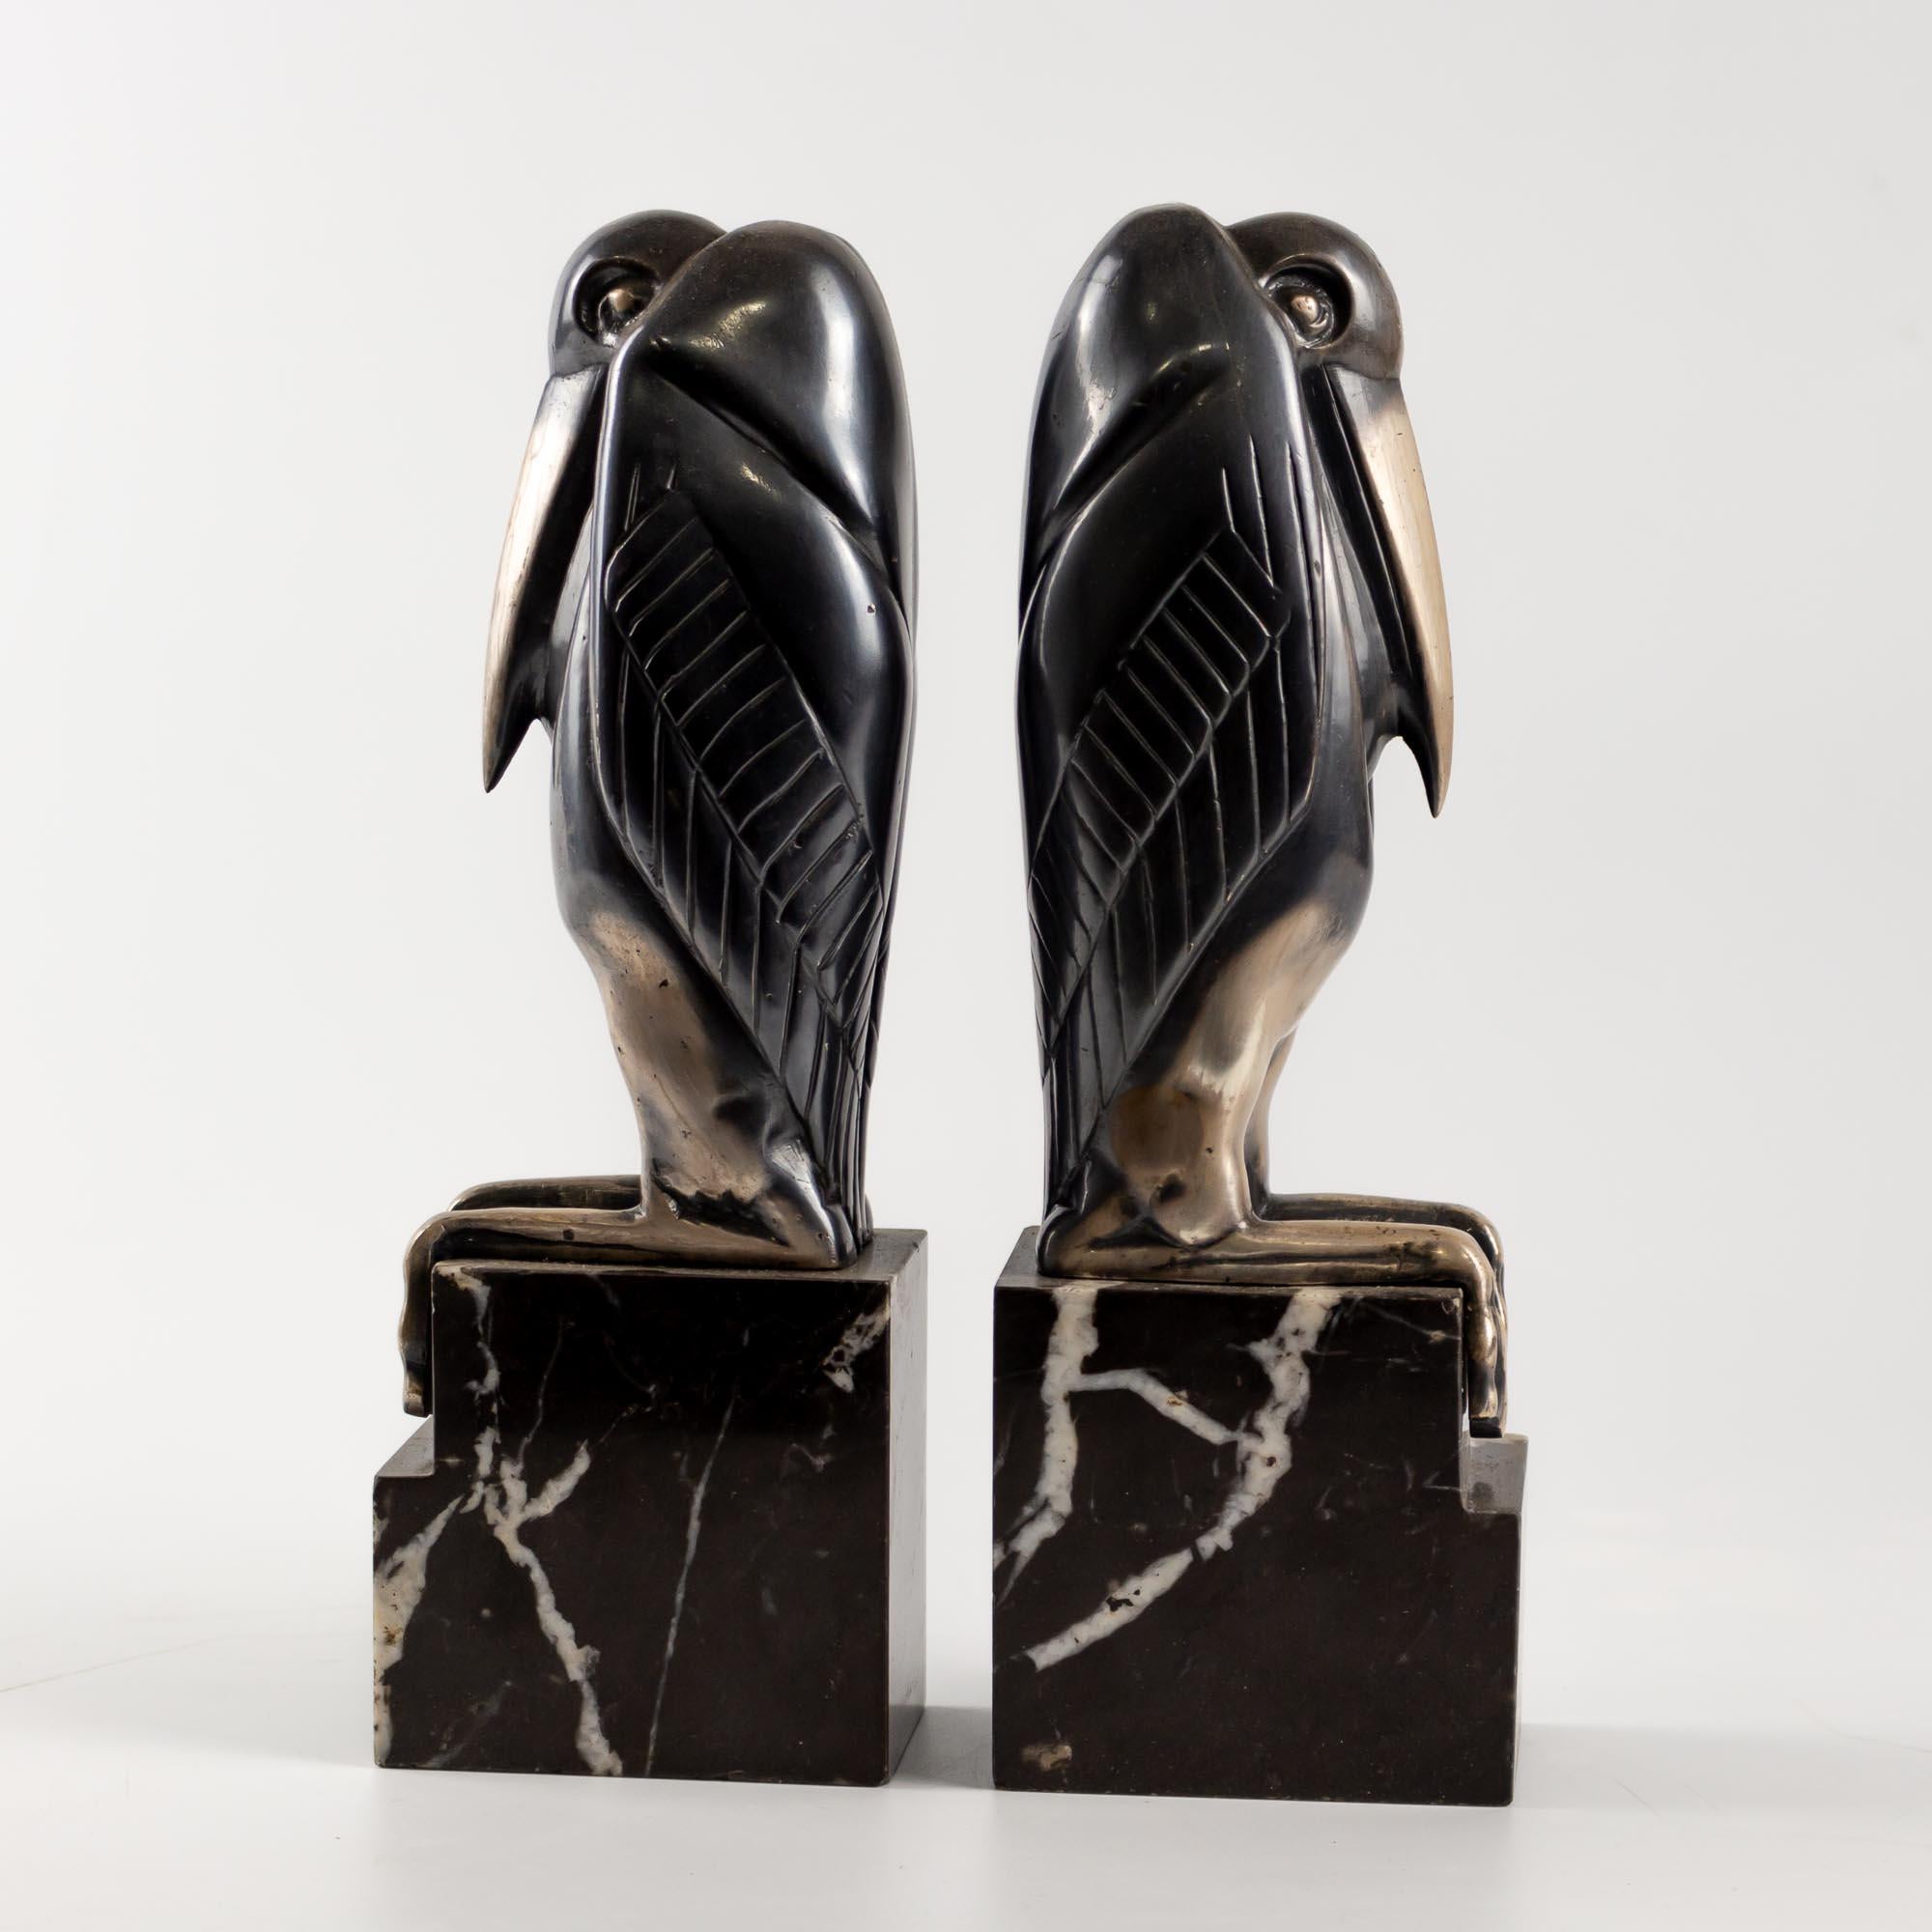 French Pair of Art Deco silvered bronze bookends by Marcel-Andre Bouraine